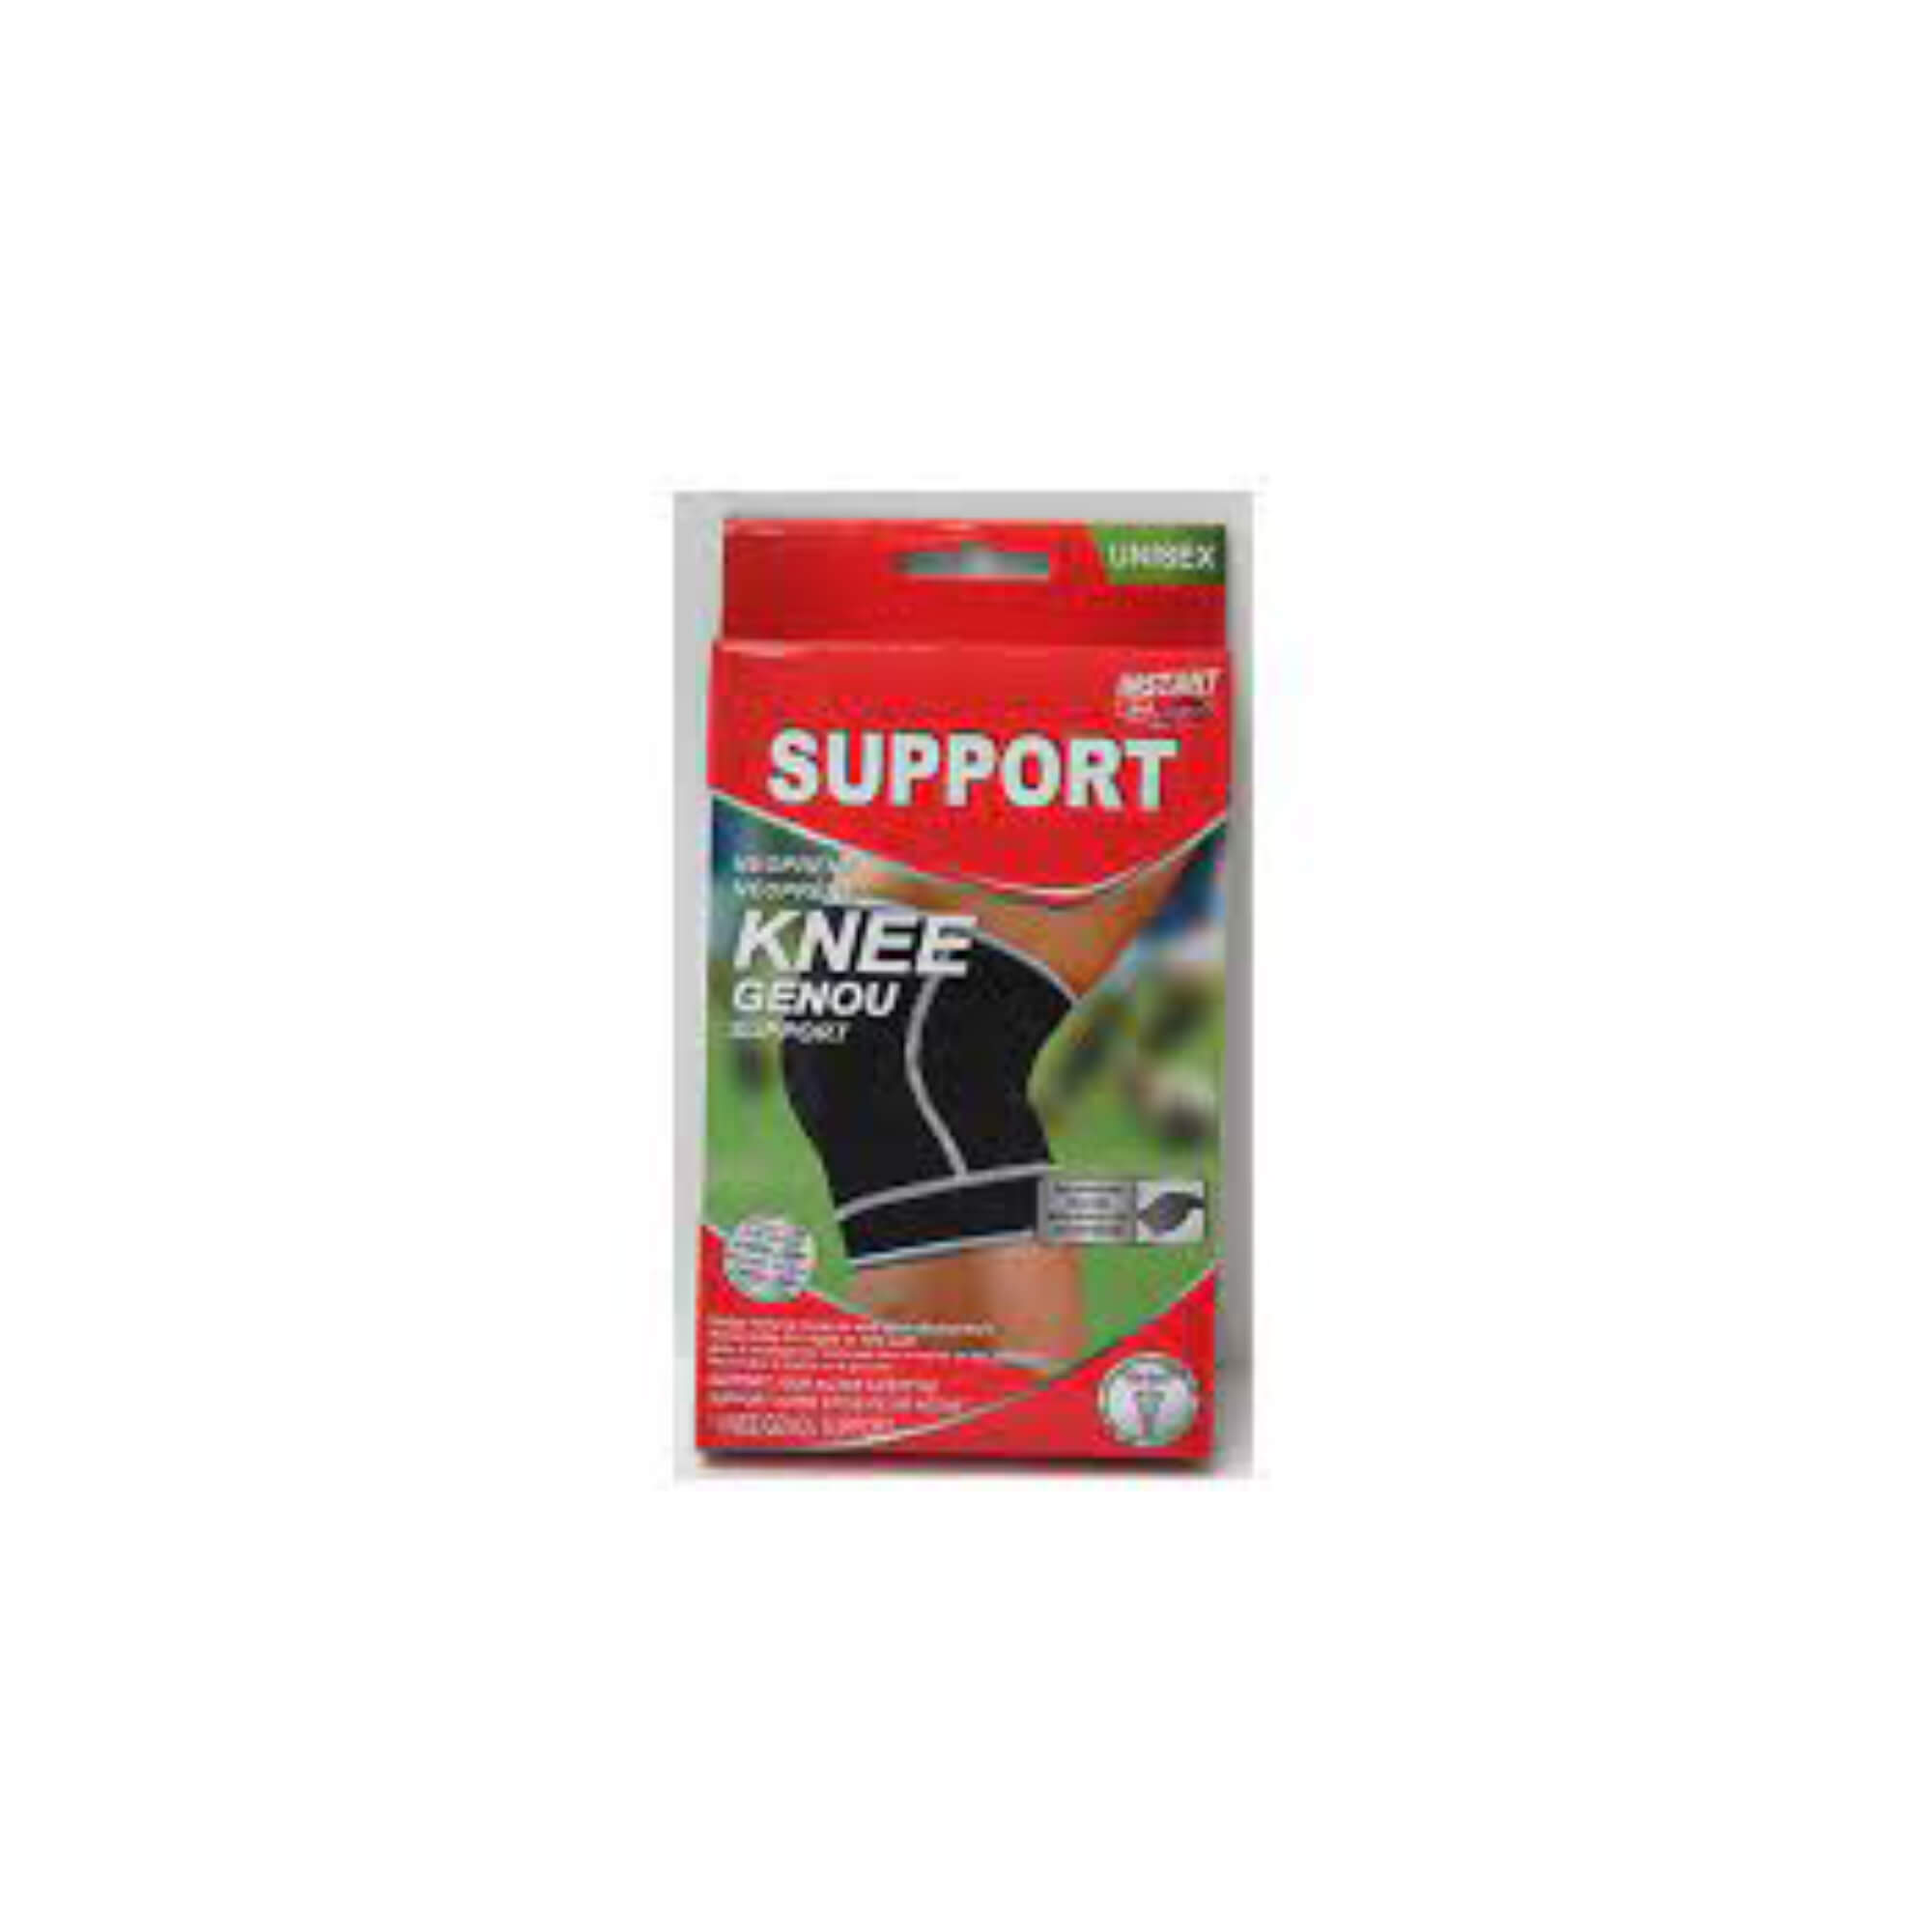 Purest Instant Aid Knee Support - Pack of 3